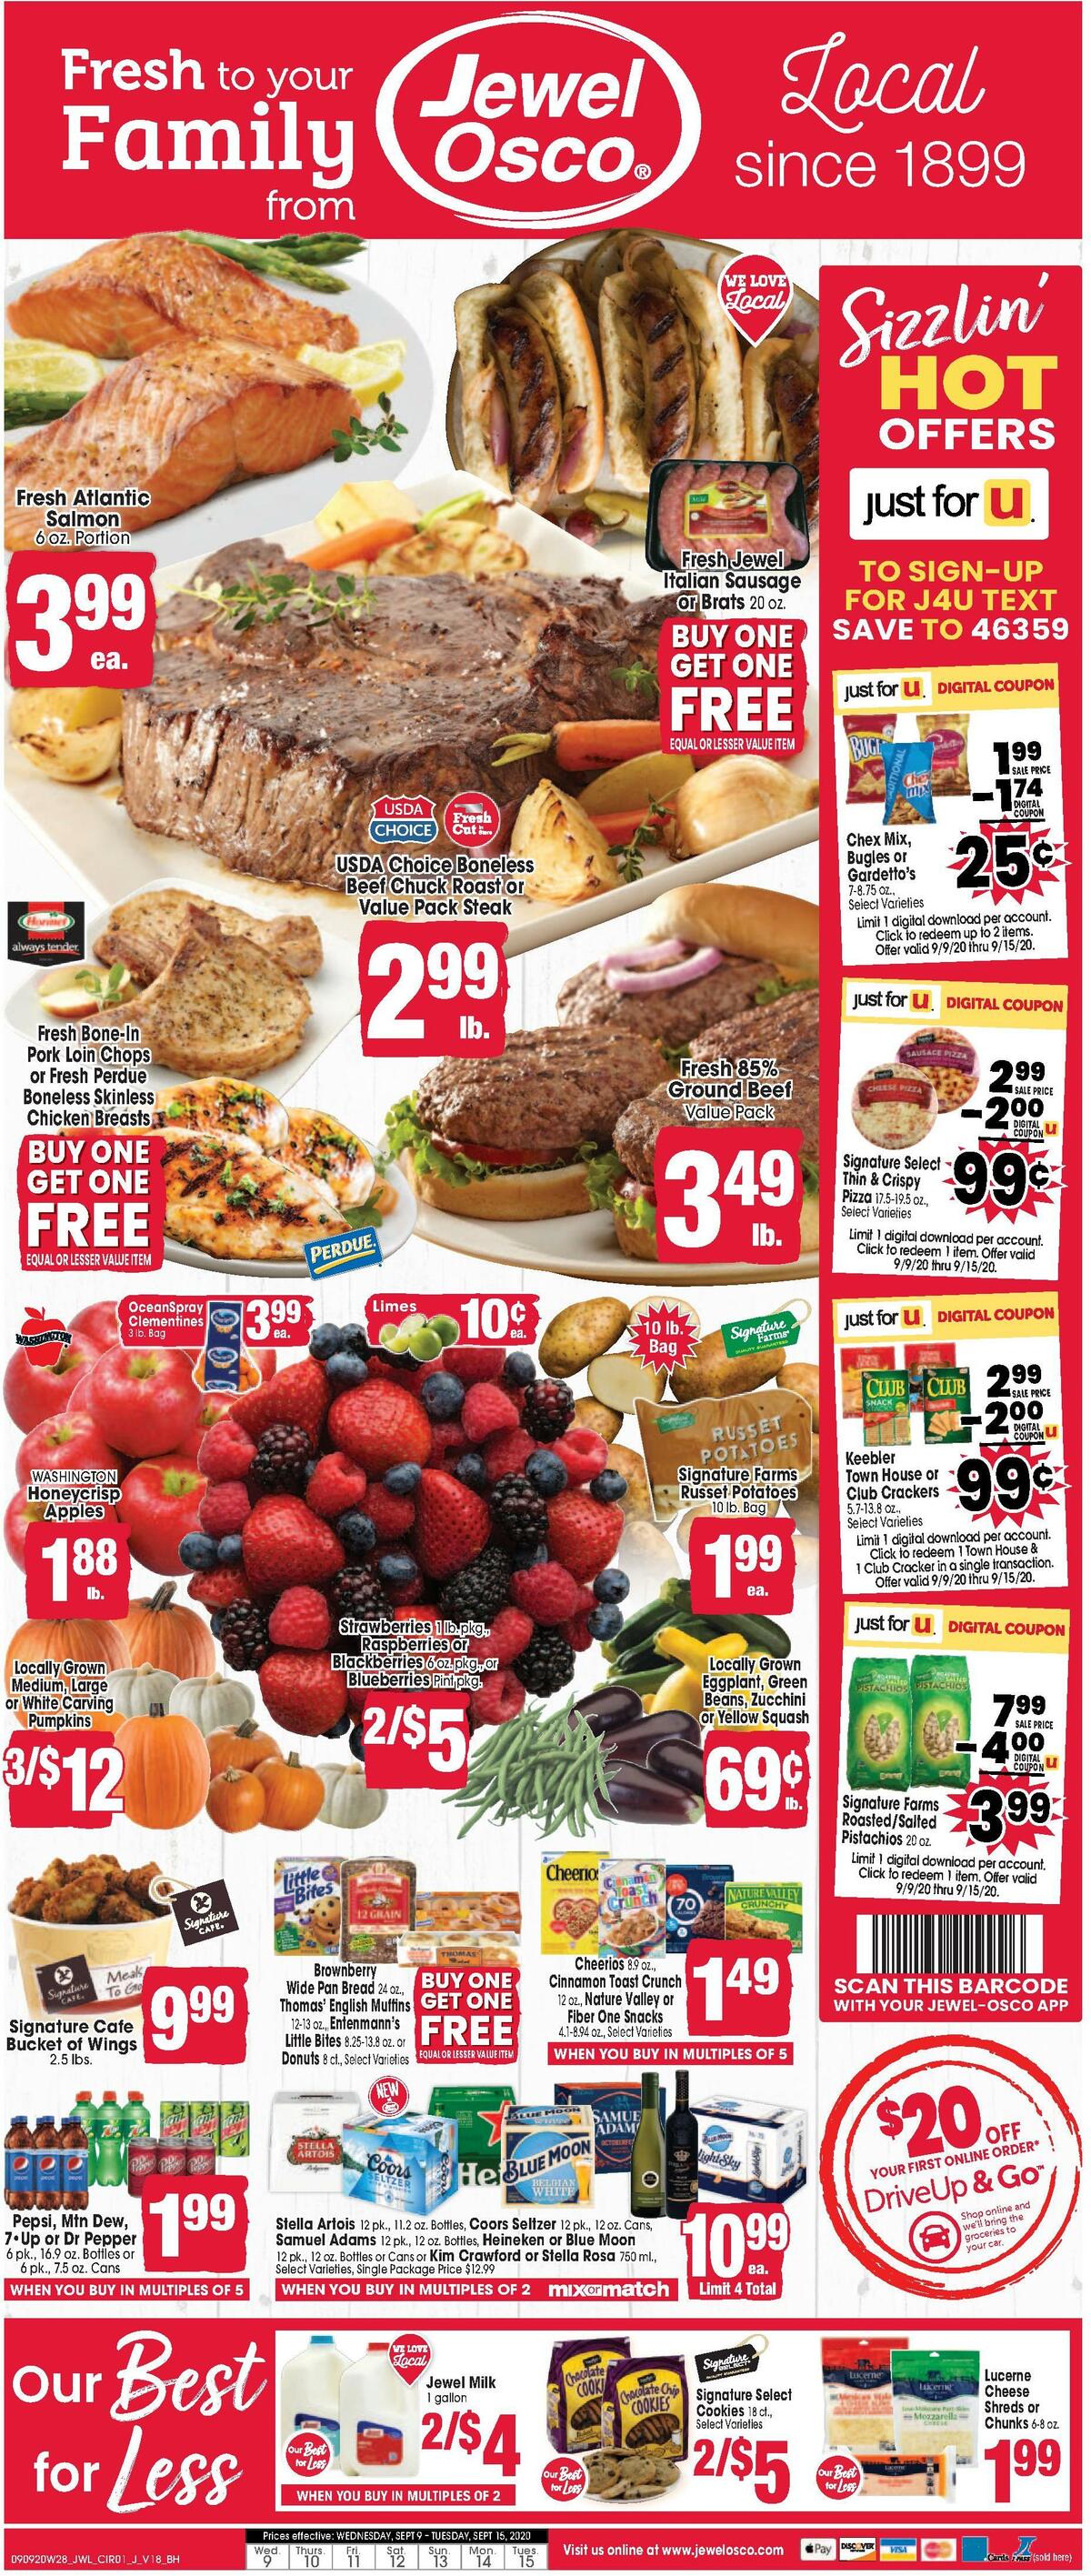 Jewel Osco Weekly Ad from September 9